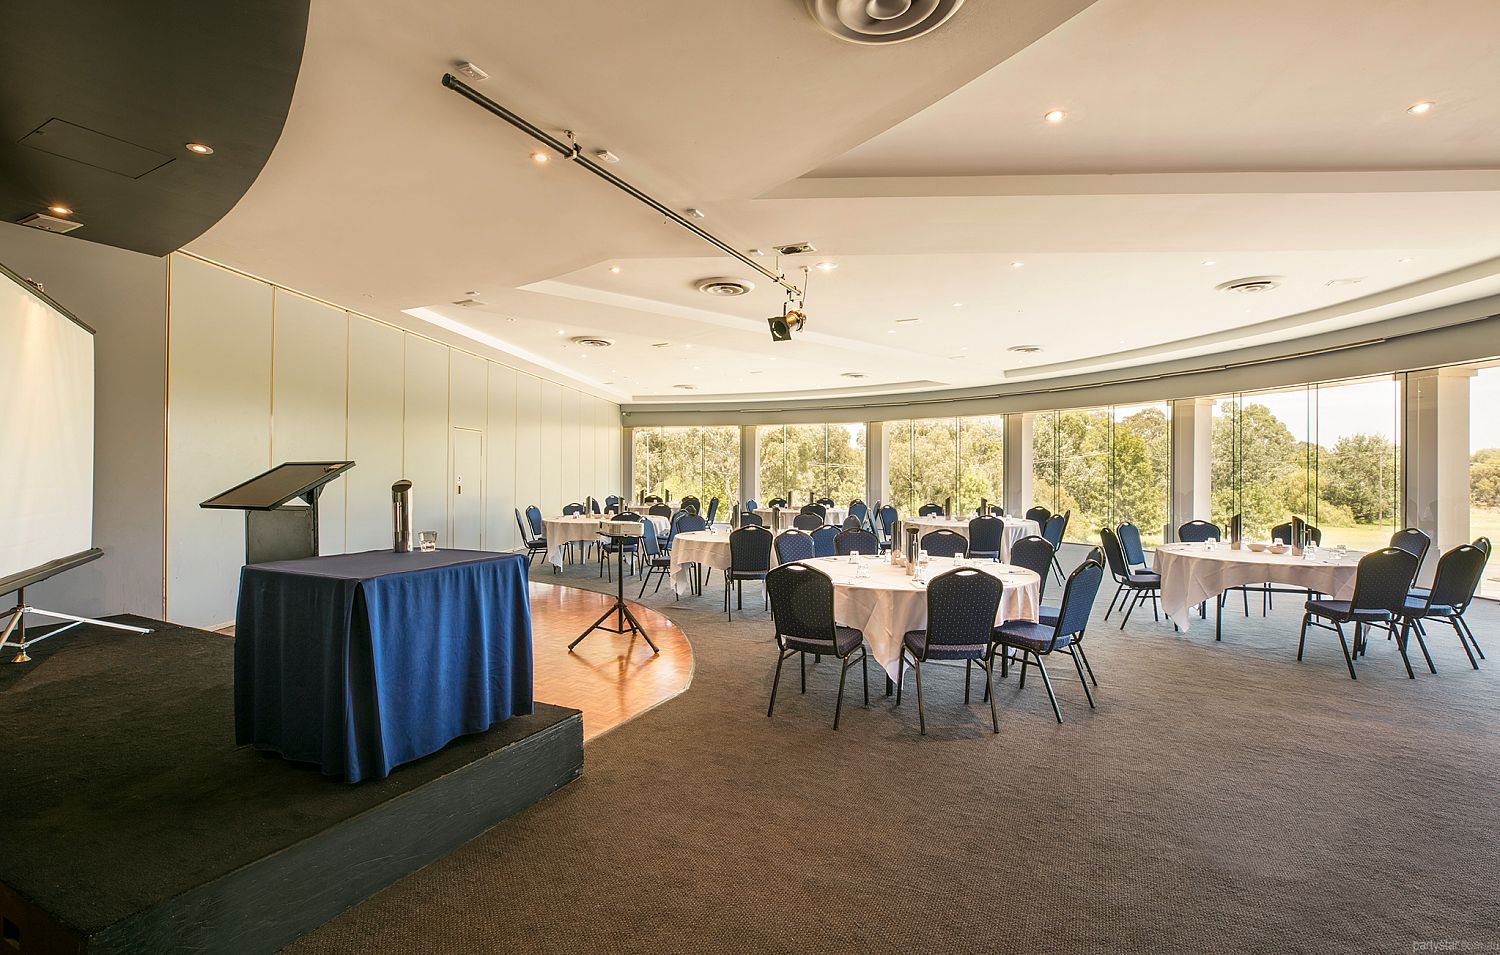 The Manningham, Bulleen, VIC. Function Room hire photo #3